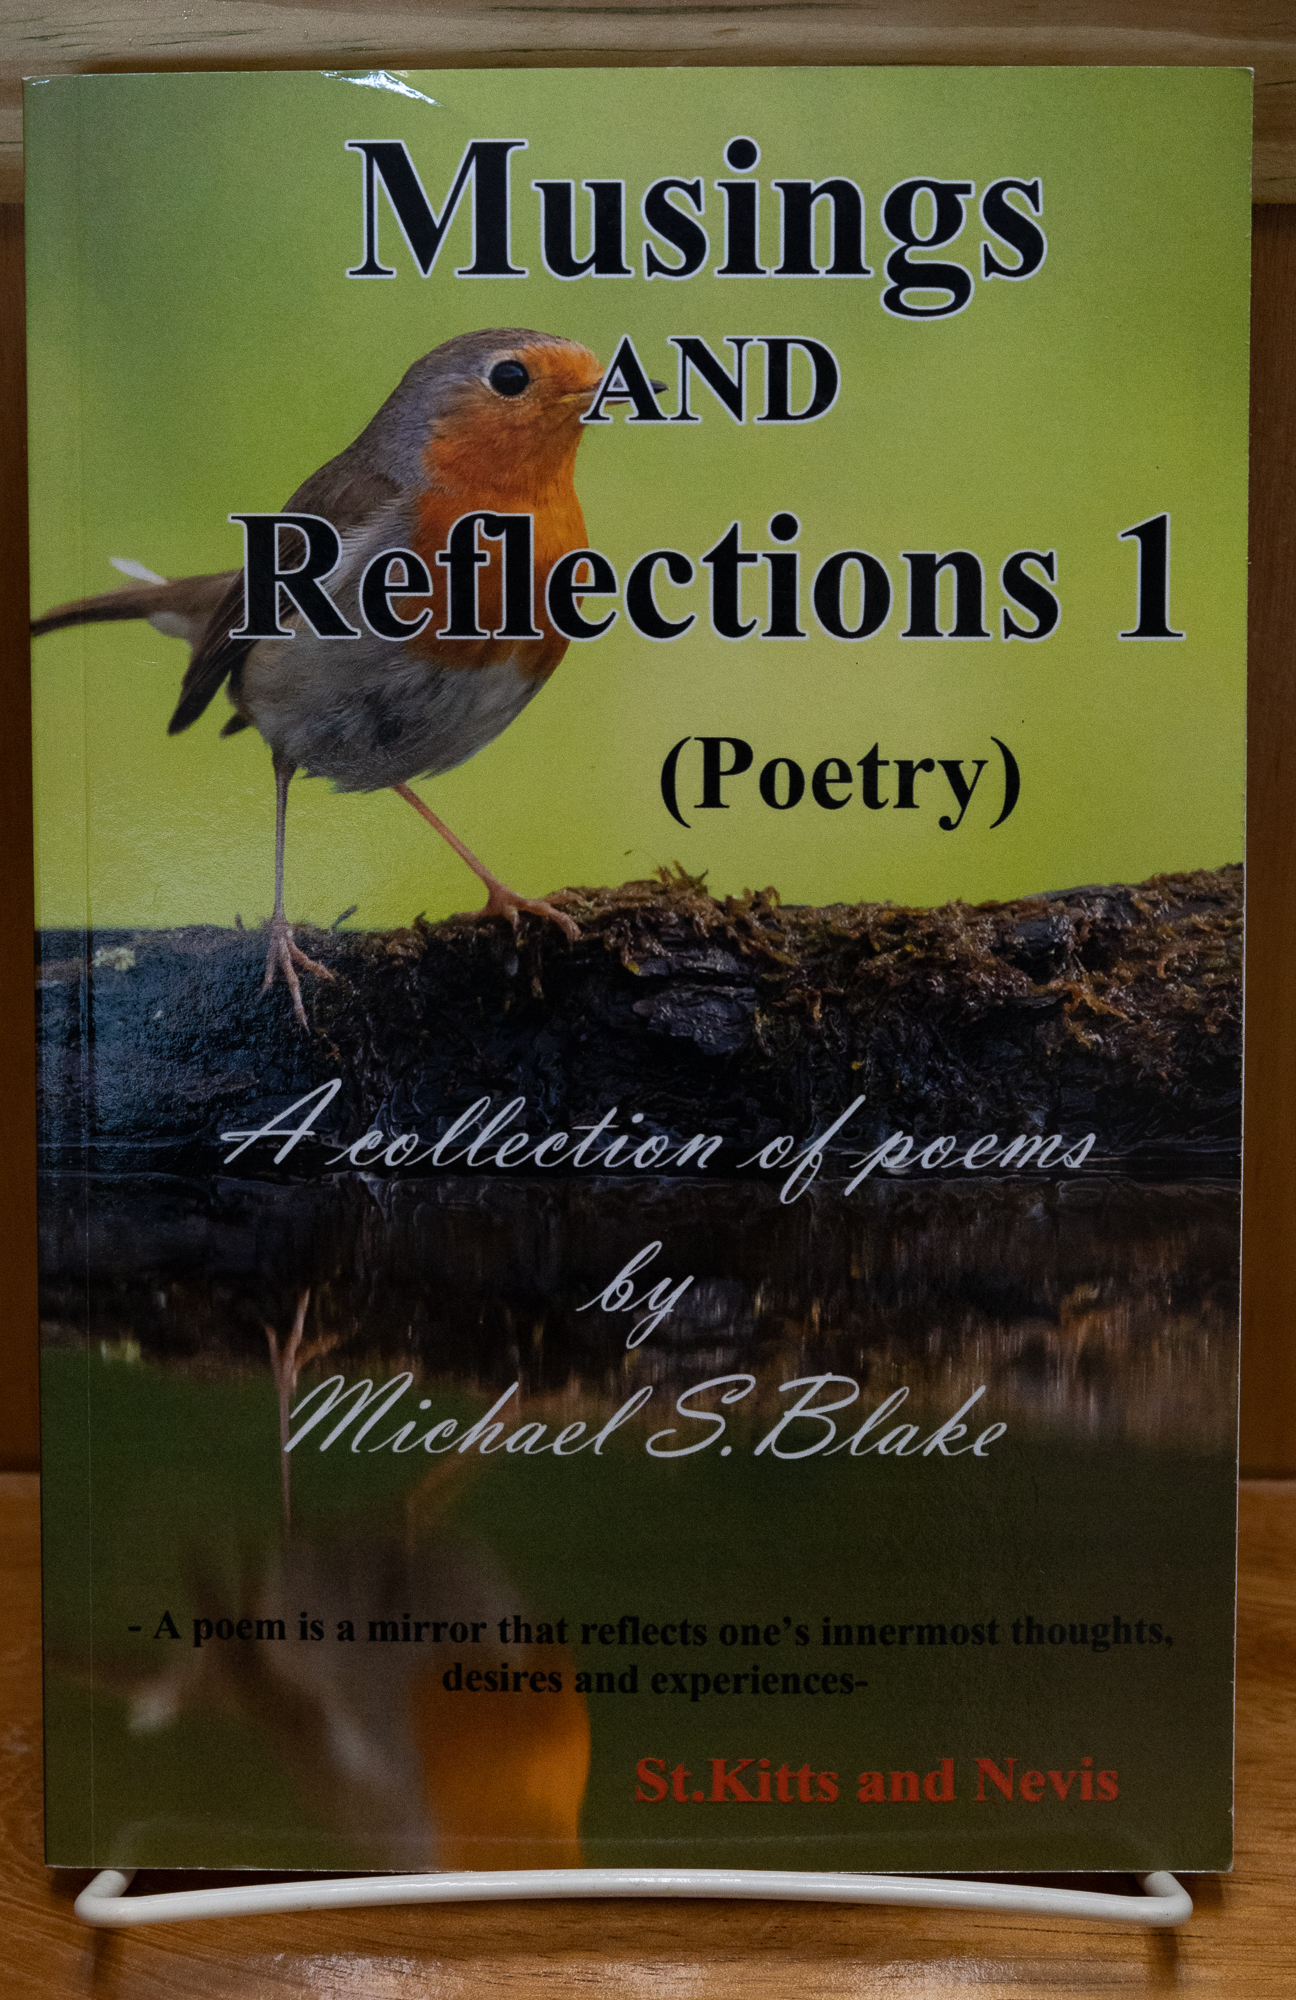 Musings and Reflections 1